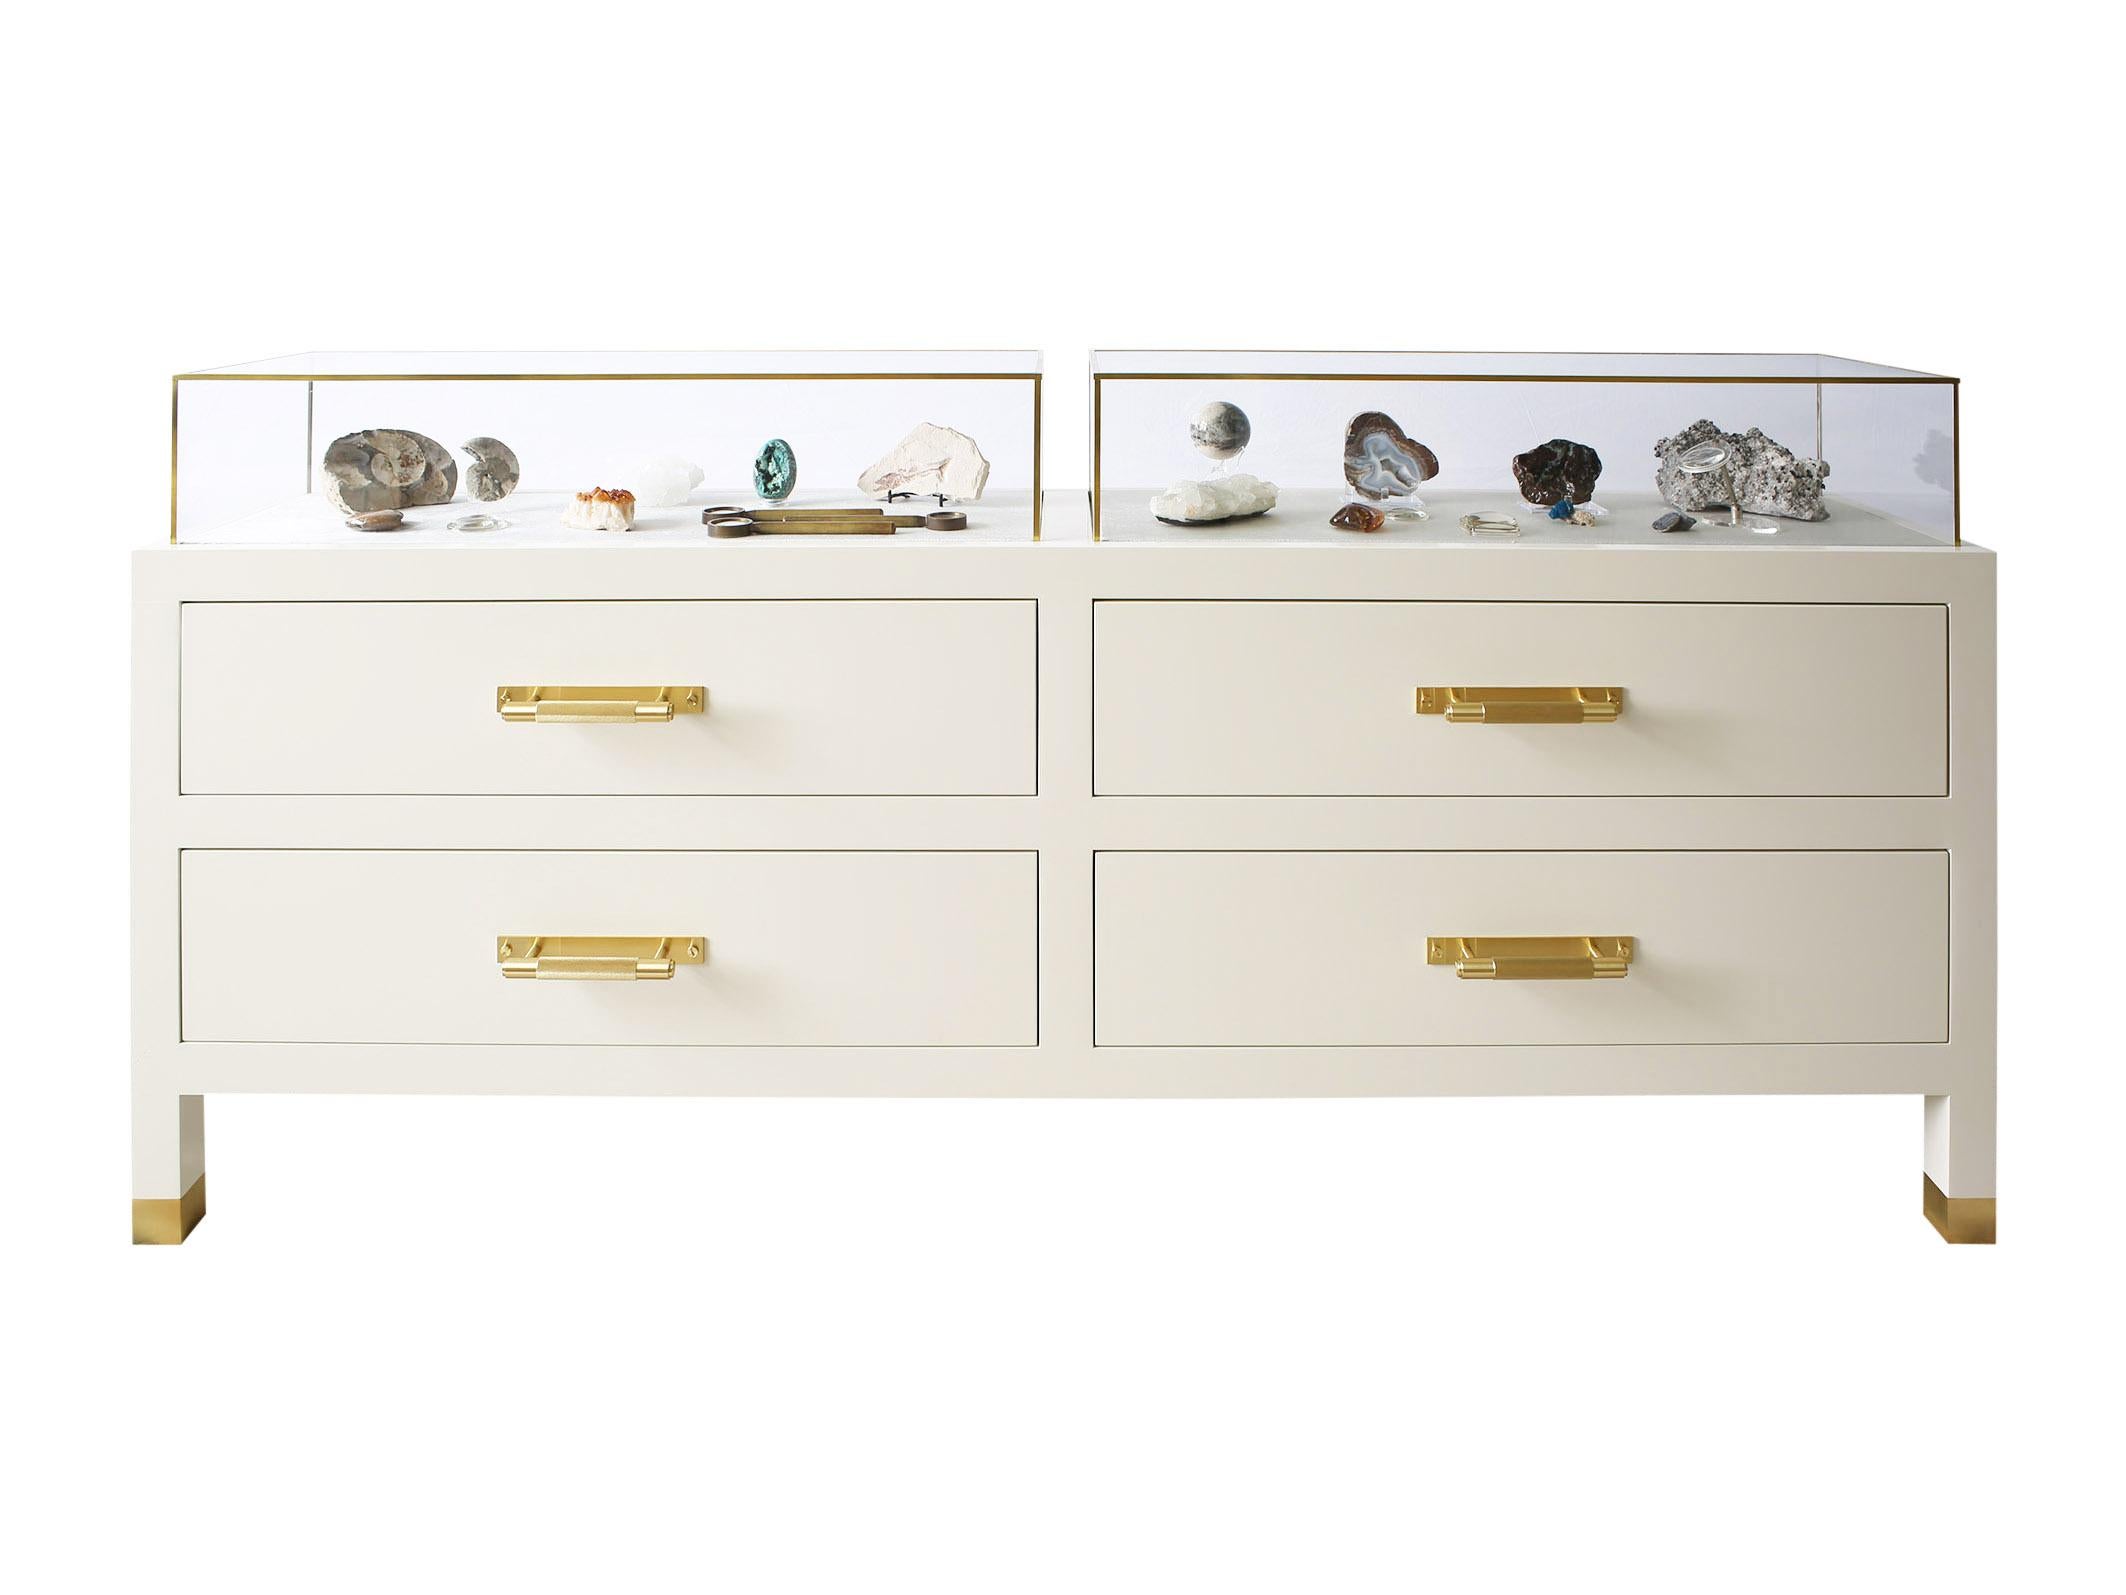 Lisa Tharp Collection  Museum Console

Inspired by museums, libraries and galleries worldwide, the Museum console showcases objects in clear display boxes lined with silky velvet. Drop-down drawer fronts maximize interior storage.

Ivory